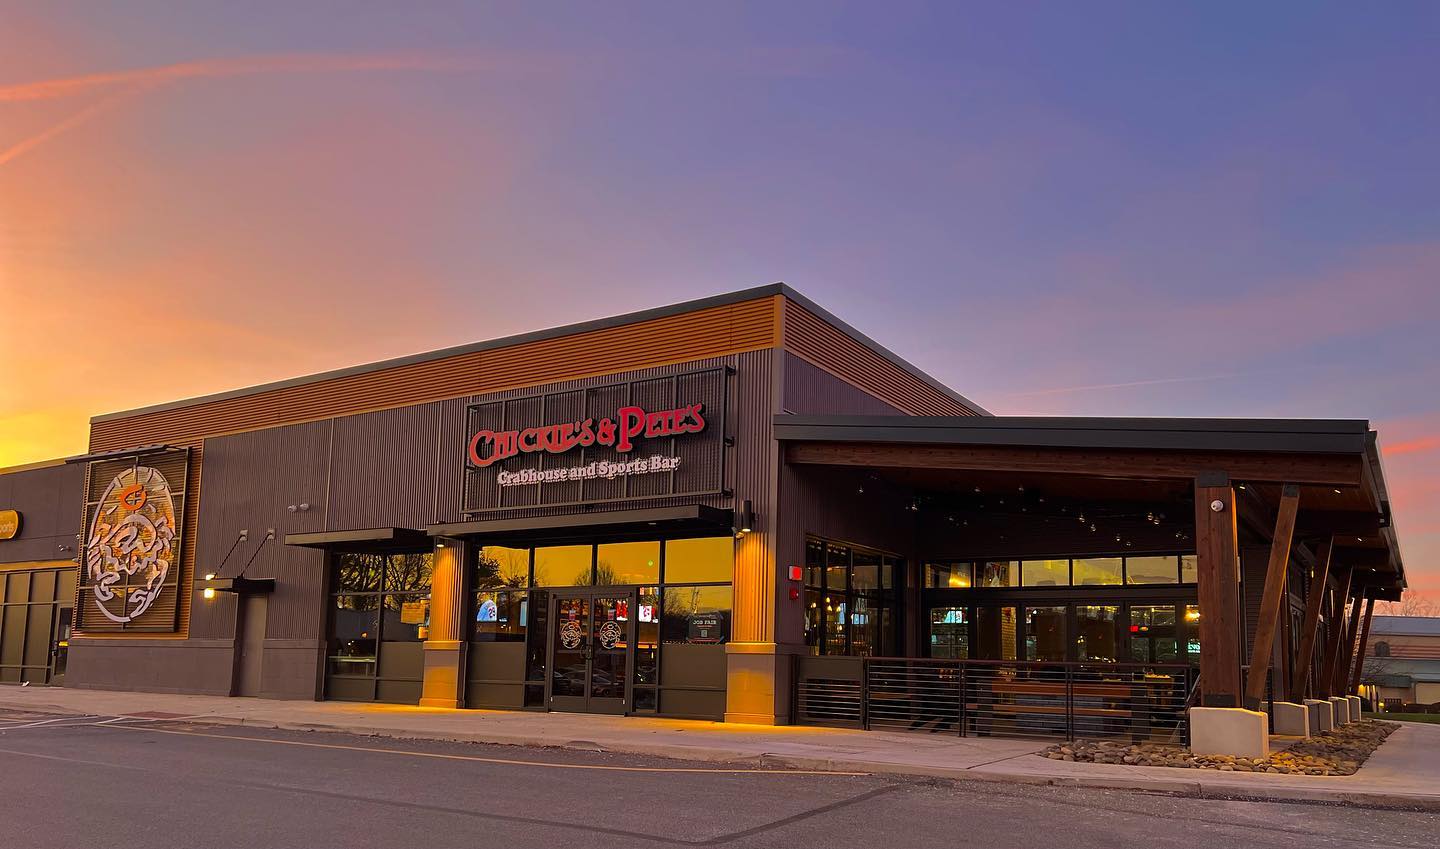 Chickies Petes